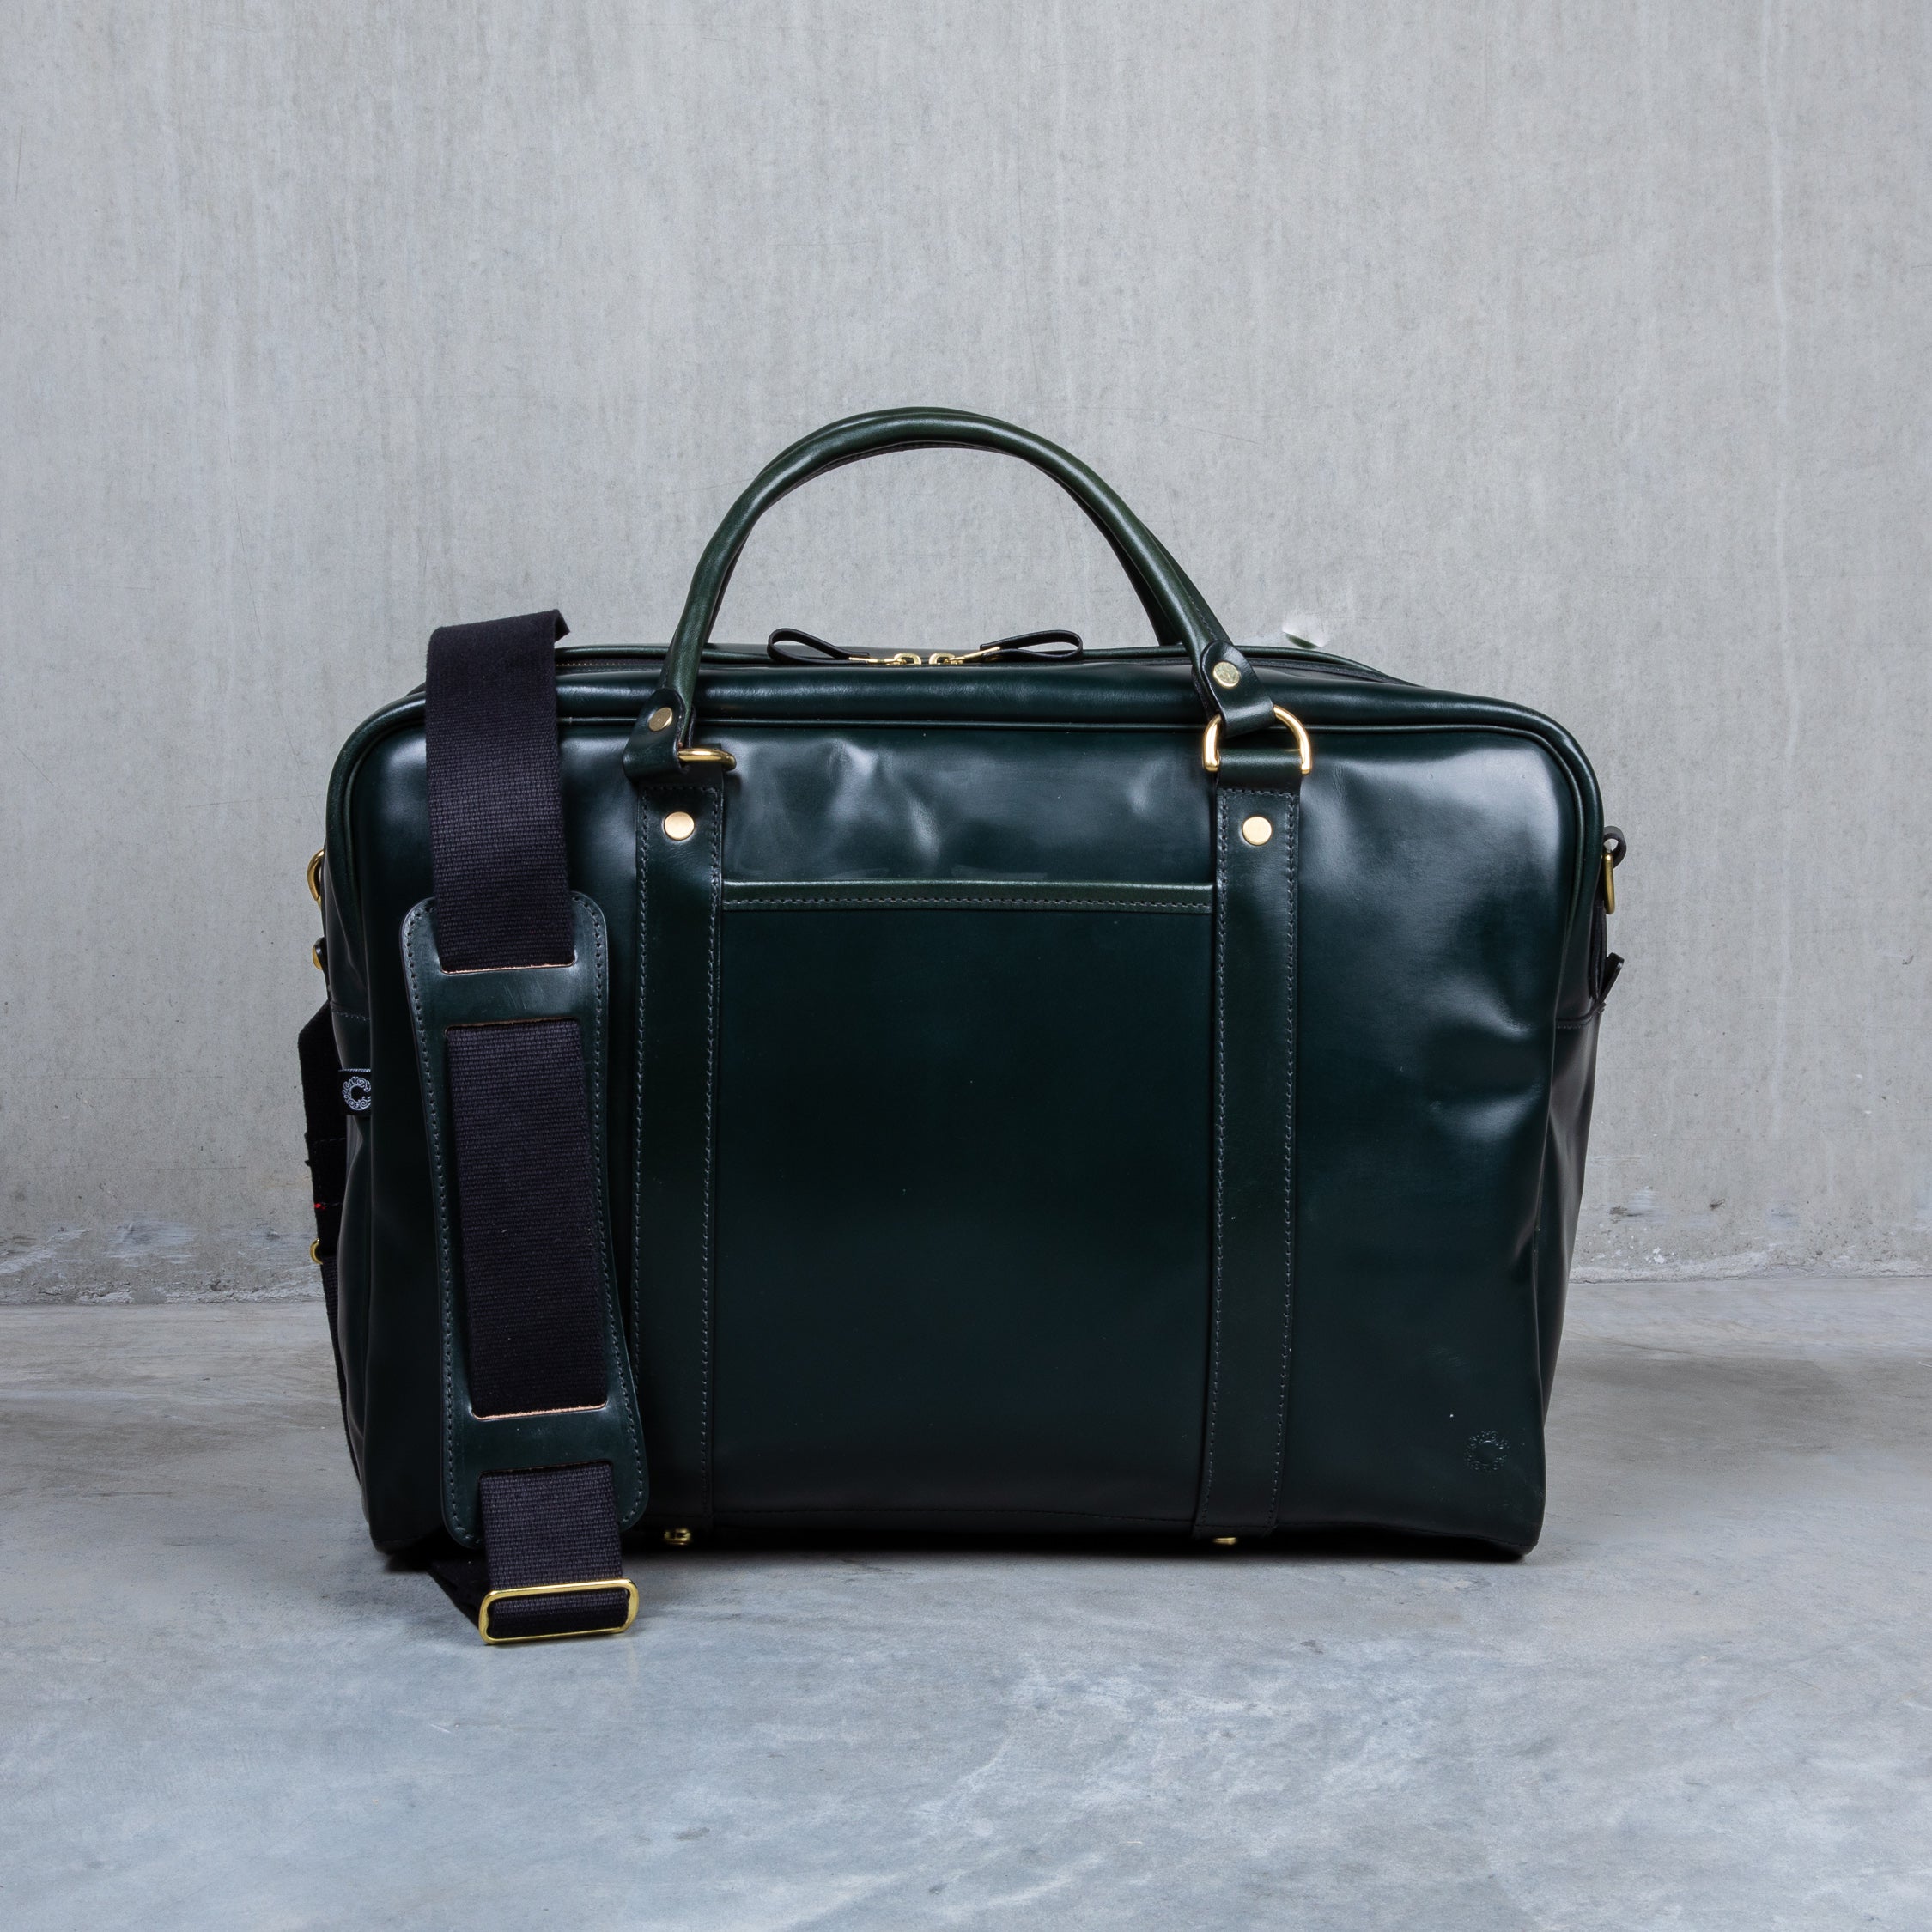 Croots Bridle Leather Holdall Racing Green - Medium